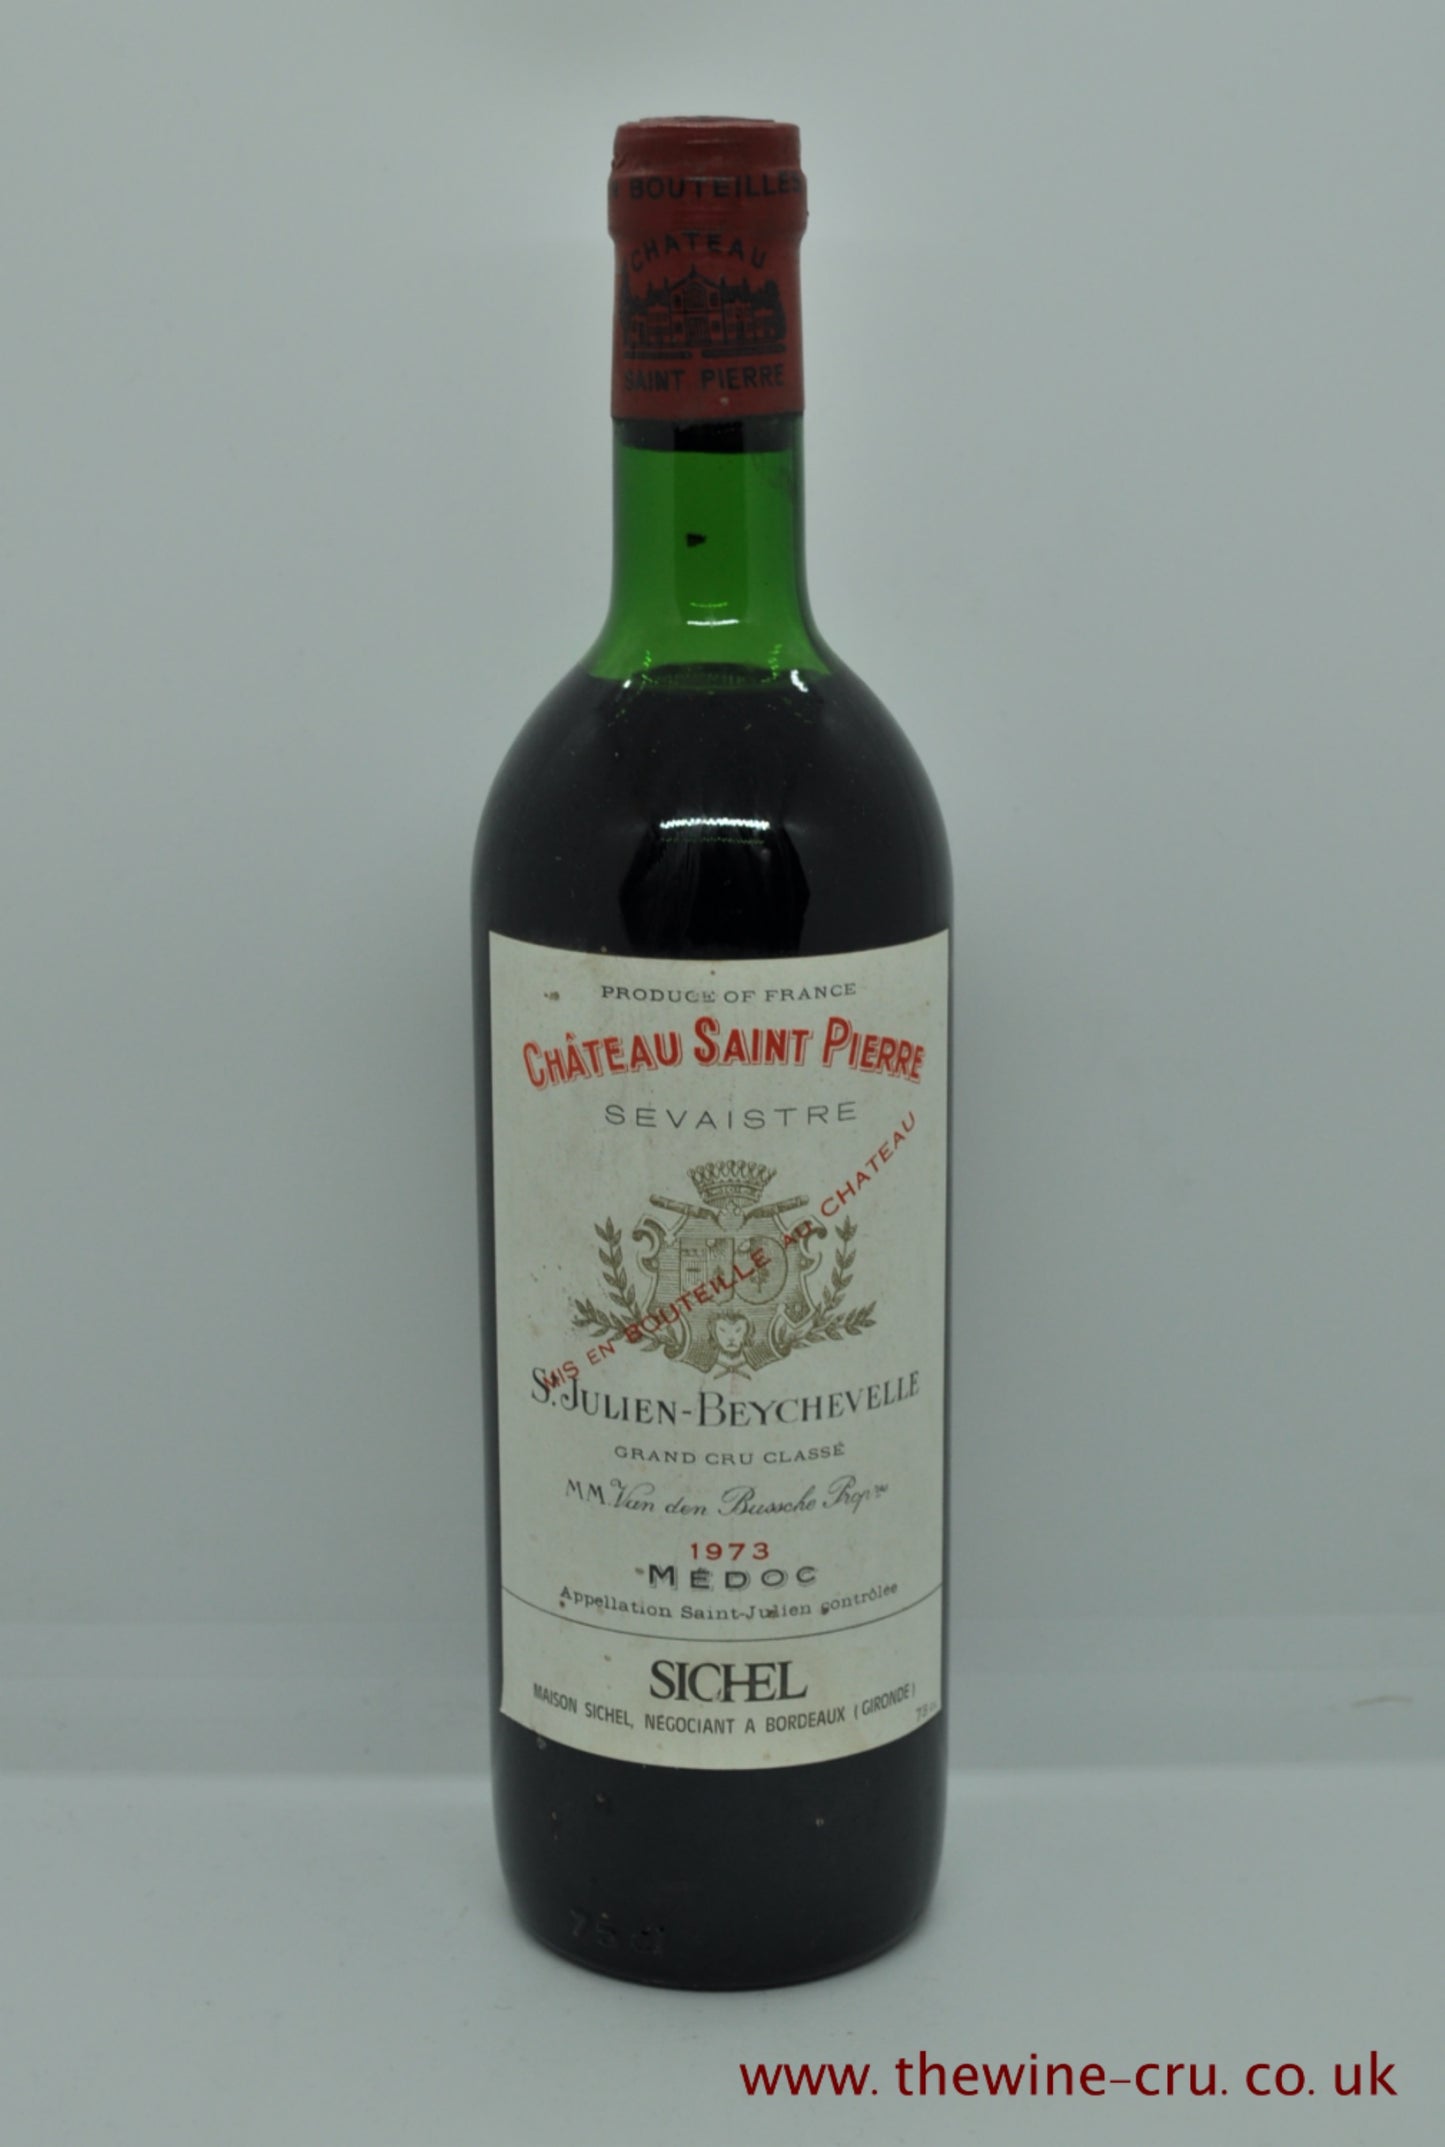 A bottle of 1973 vintage red wine from Chateau Saint Pierre Sevaistire Saint Julien, Bordeaux, France. The bottle is in good condition with the wine level at top shoulder. Immediate delivery. Free local delivery. Gift wrapping available.